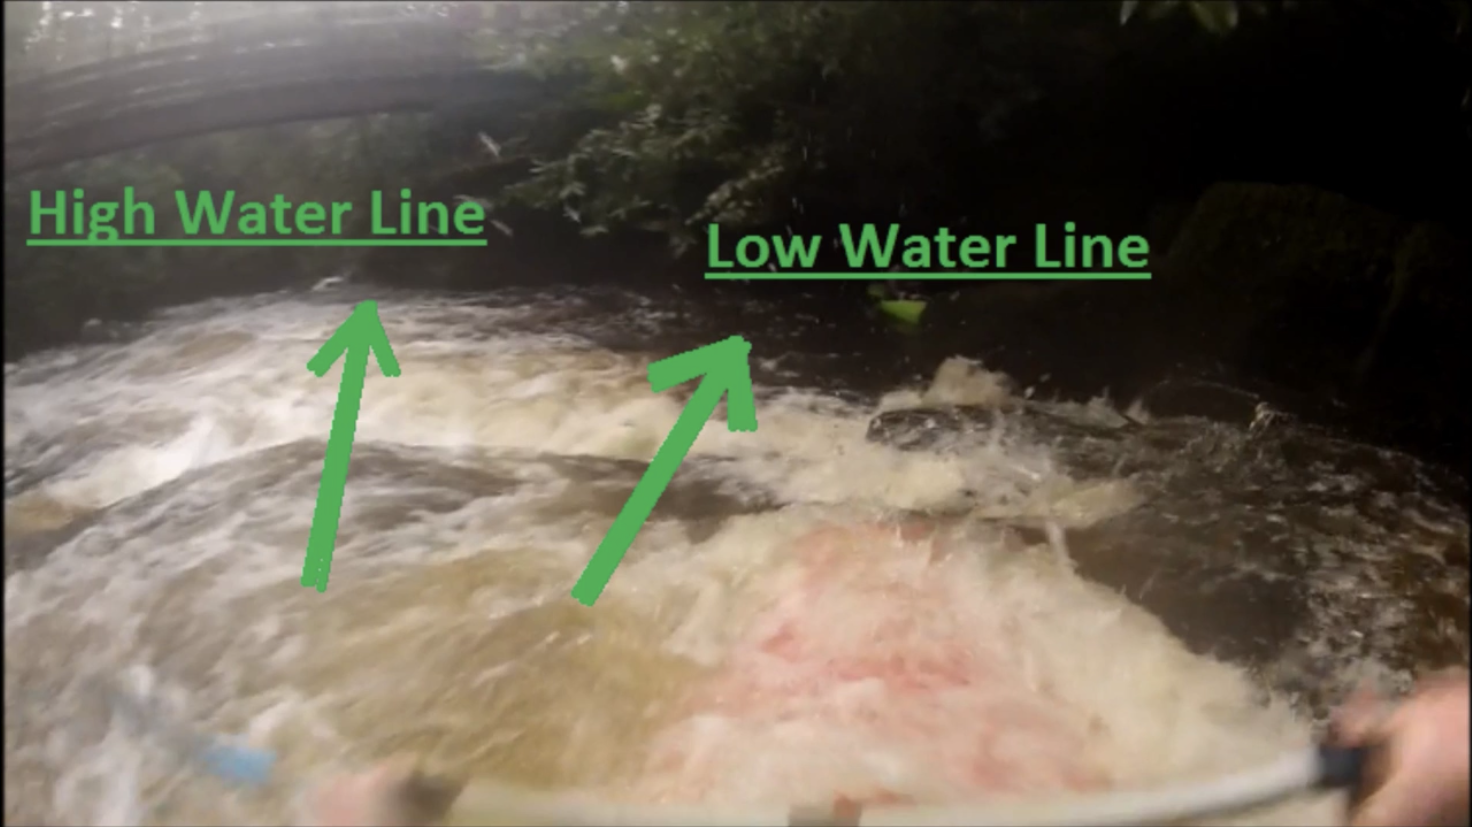 Clare Glens Big Eas / Ass Waterfall River Guide showing lines to take. Created by University of Limerick Kayak Club.